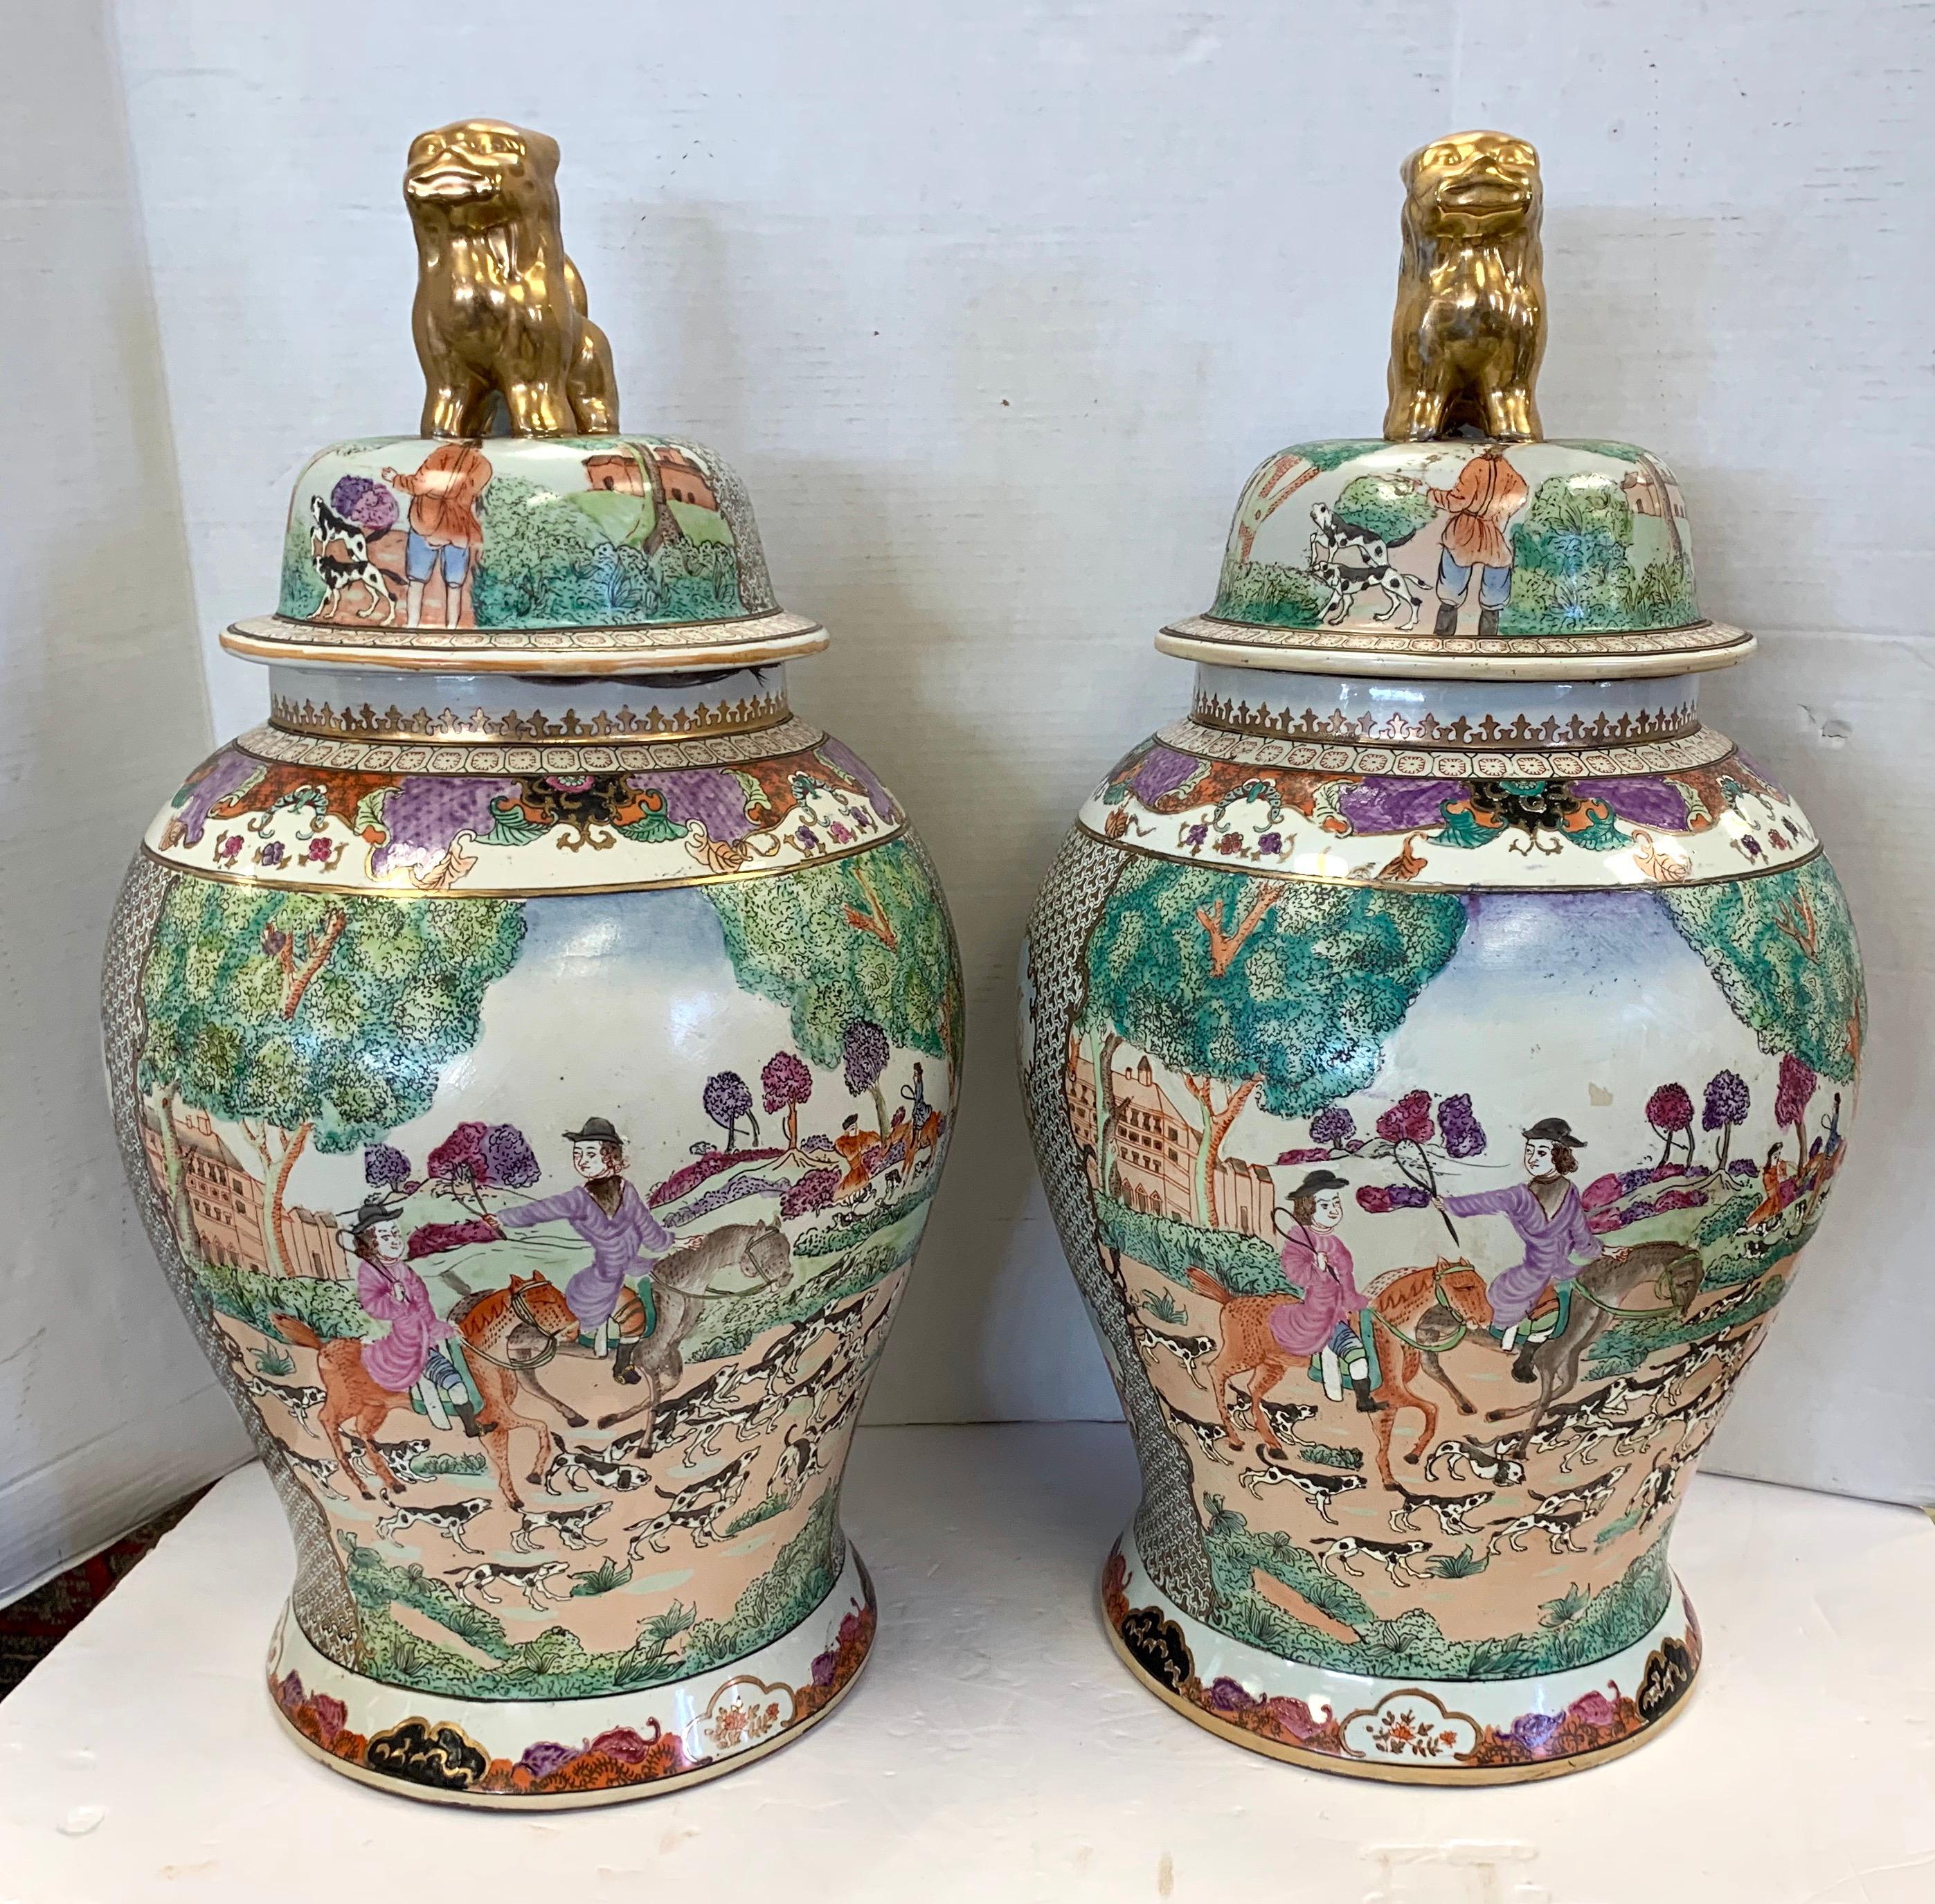 Magnificent large pair of matching vintage Chinese porcelain urns. What sets this pair apart is the art work which features English hunt scenes. They are topped with a gold foo dog. Please peruse all pictures, they are exquisite. Signed on bottom.